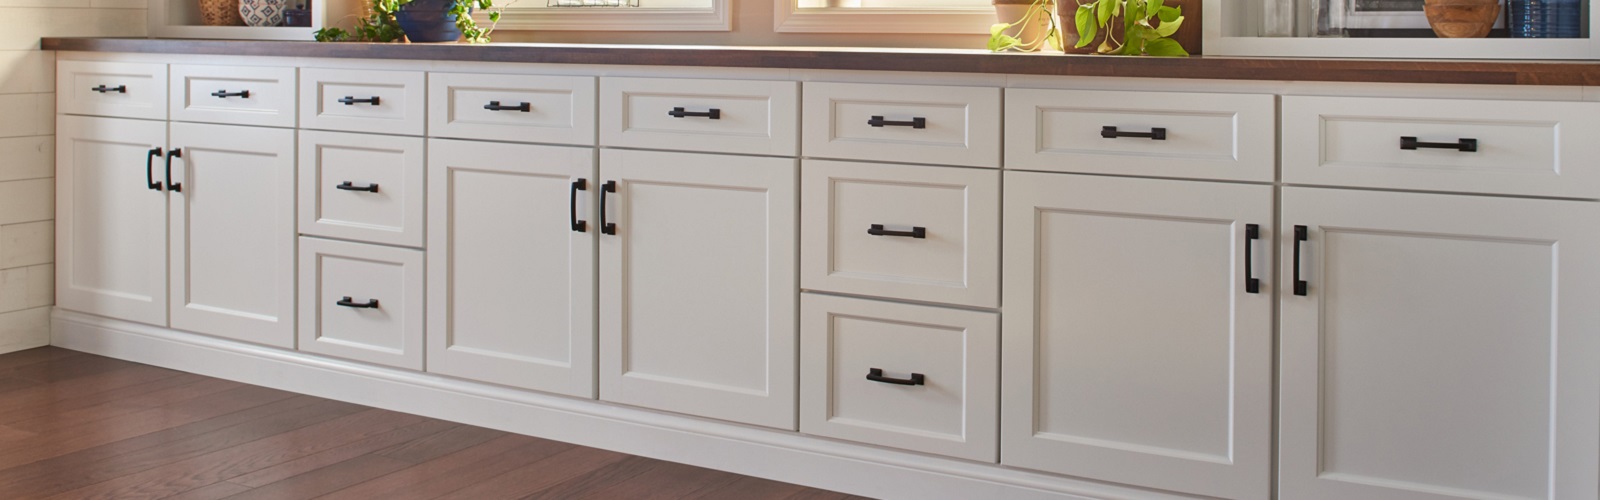 How Much Does it Cost to Replace Cabinet Doors? - Cabinet Now